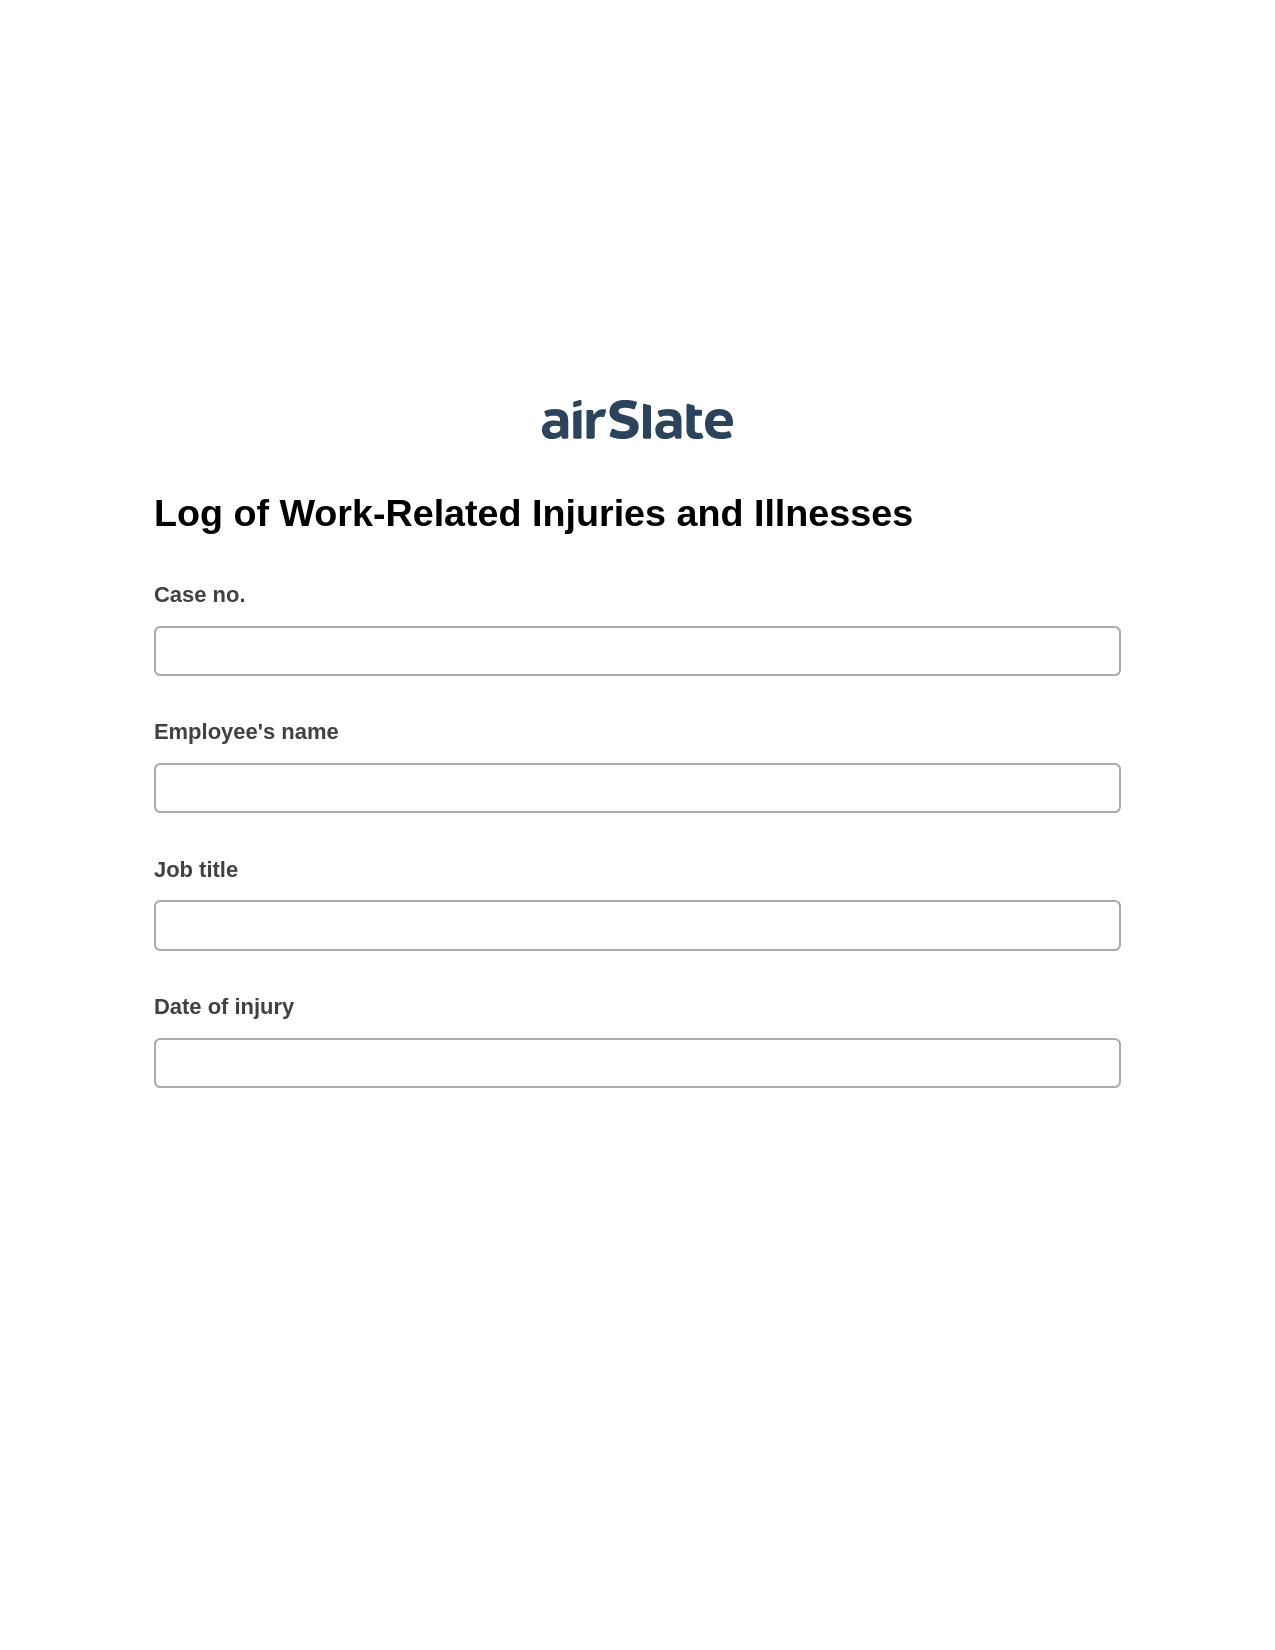 Log of Work-Related Injuries and Illnesses Pre-fill Slate from MS Dynamics 365 Records Bot, Jira Bot, Webhook Postfinish Bot